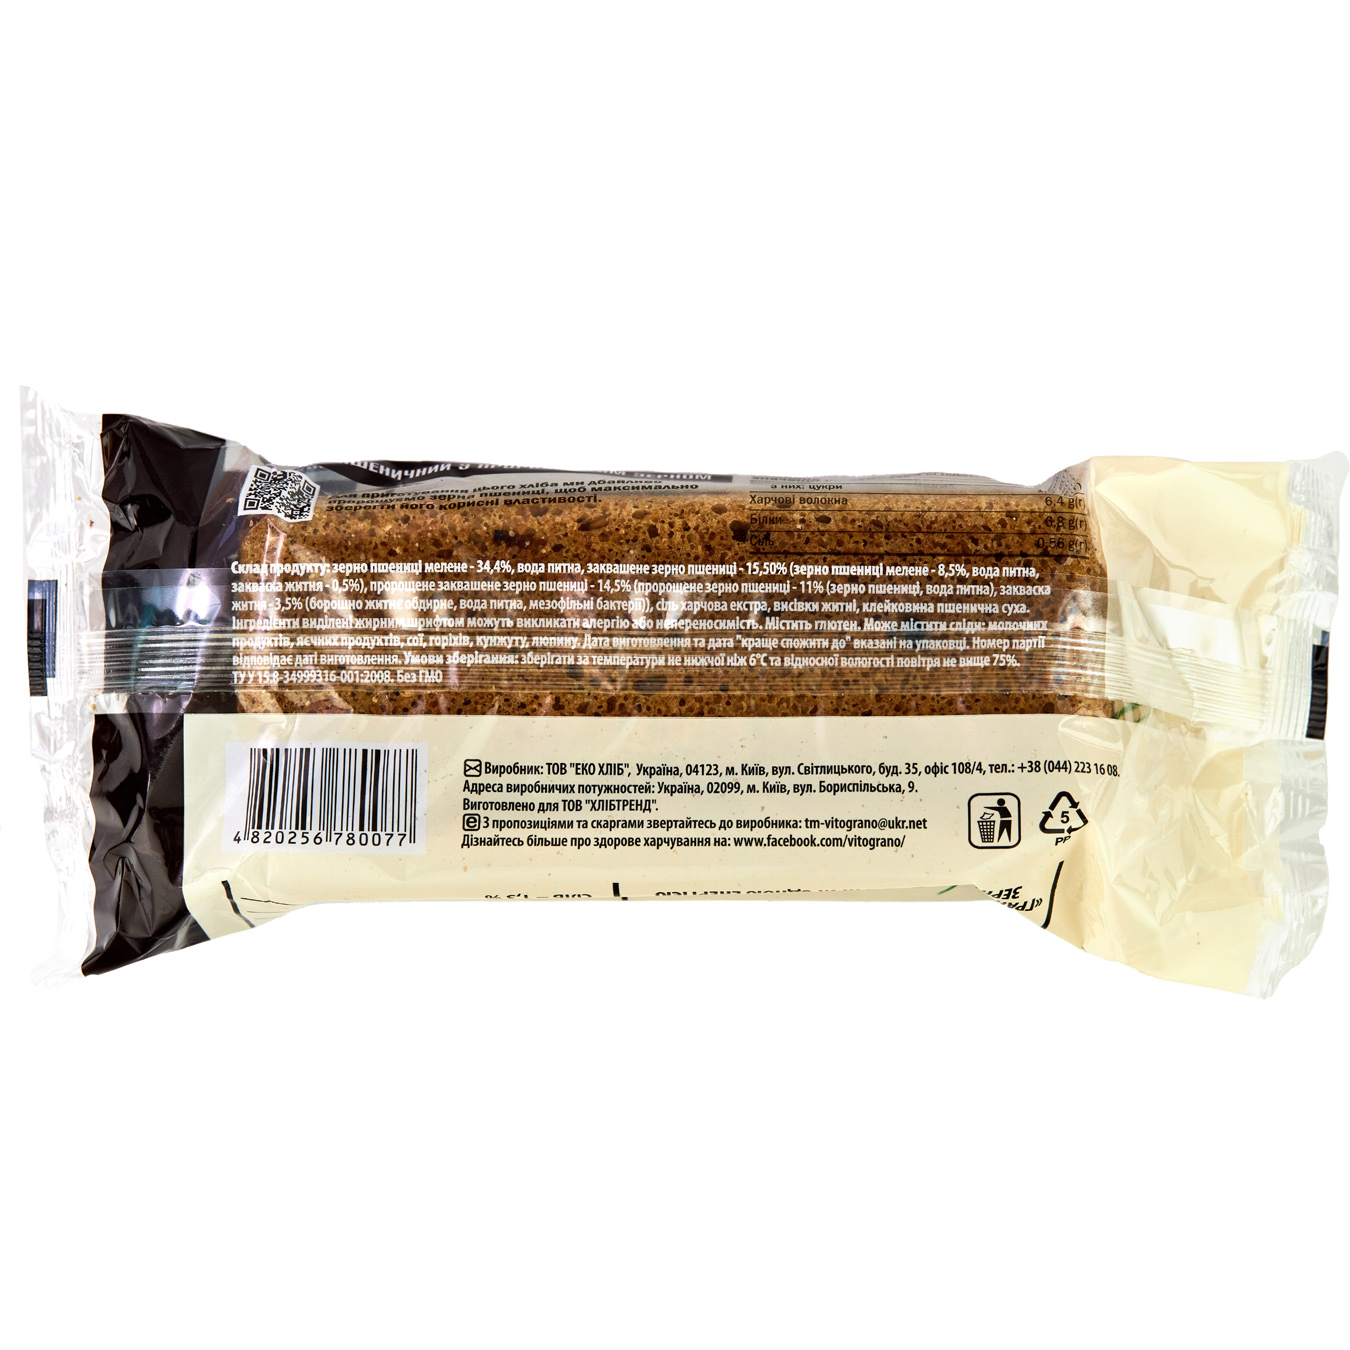 VitoGrano Bread Wheat with Sprouted Grains 380g 2